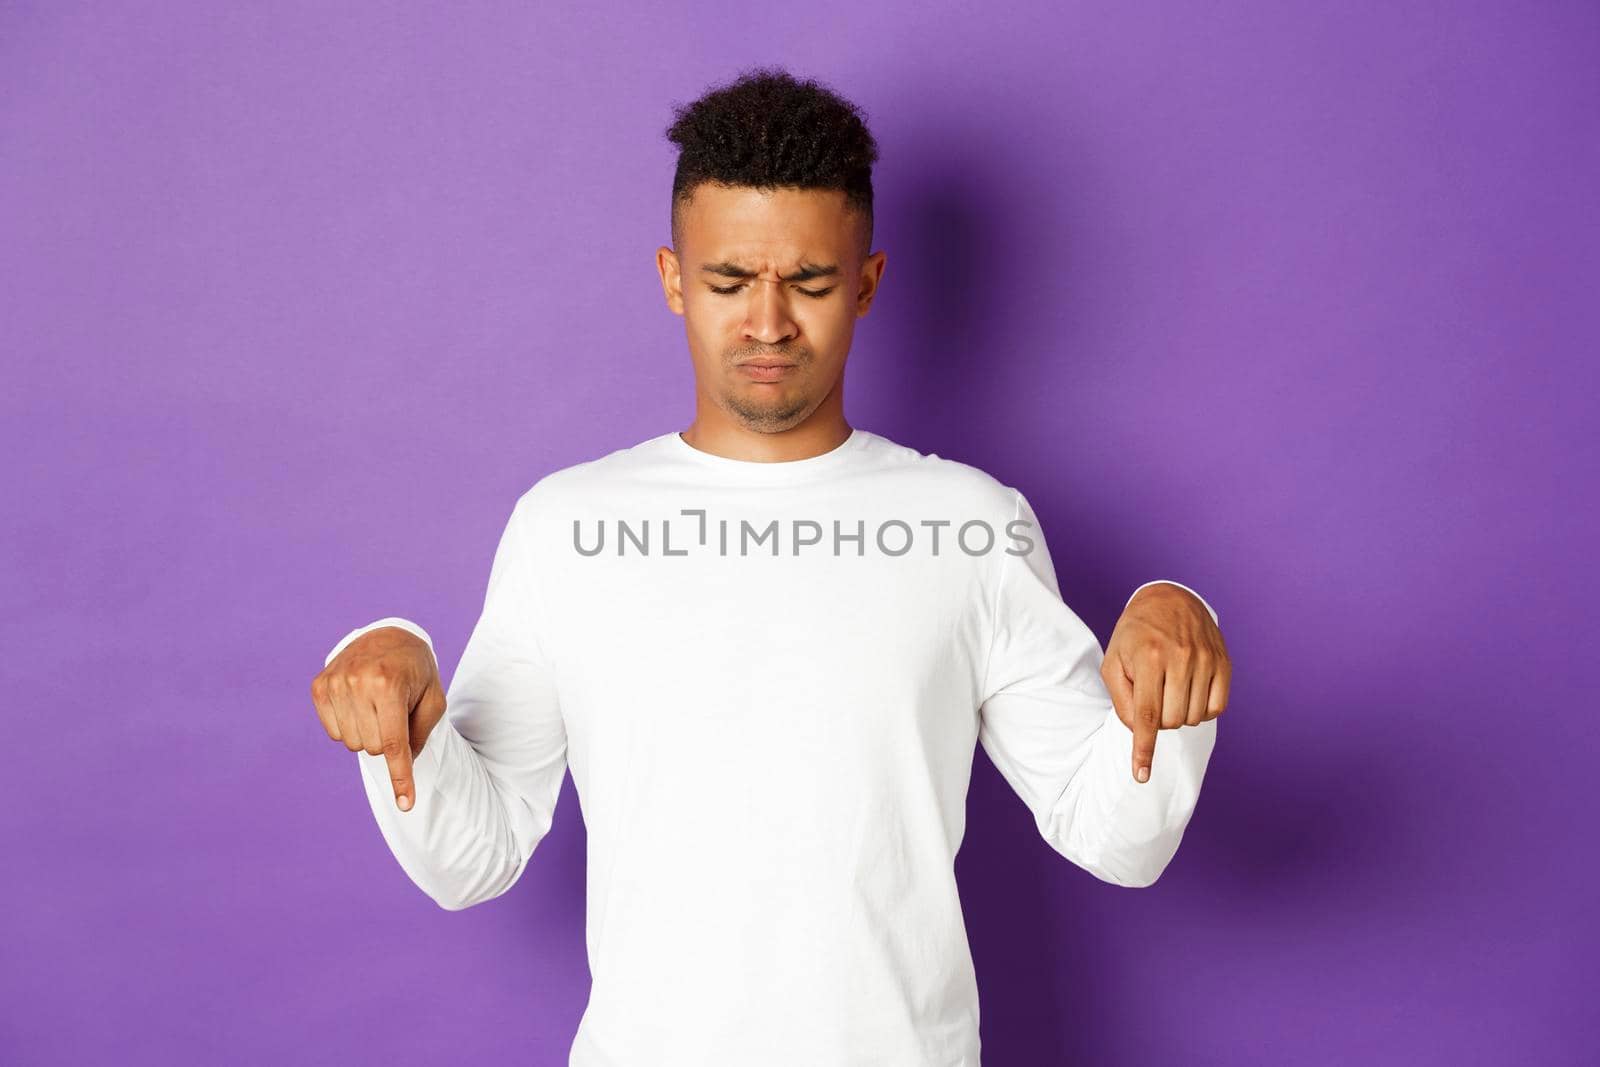 Portrait of skeptical and disappointed african-american male model in white sweatshirt, frowning and pouting upset, pointing and looking down, standing over purple background.